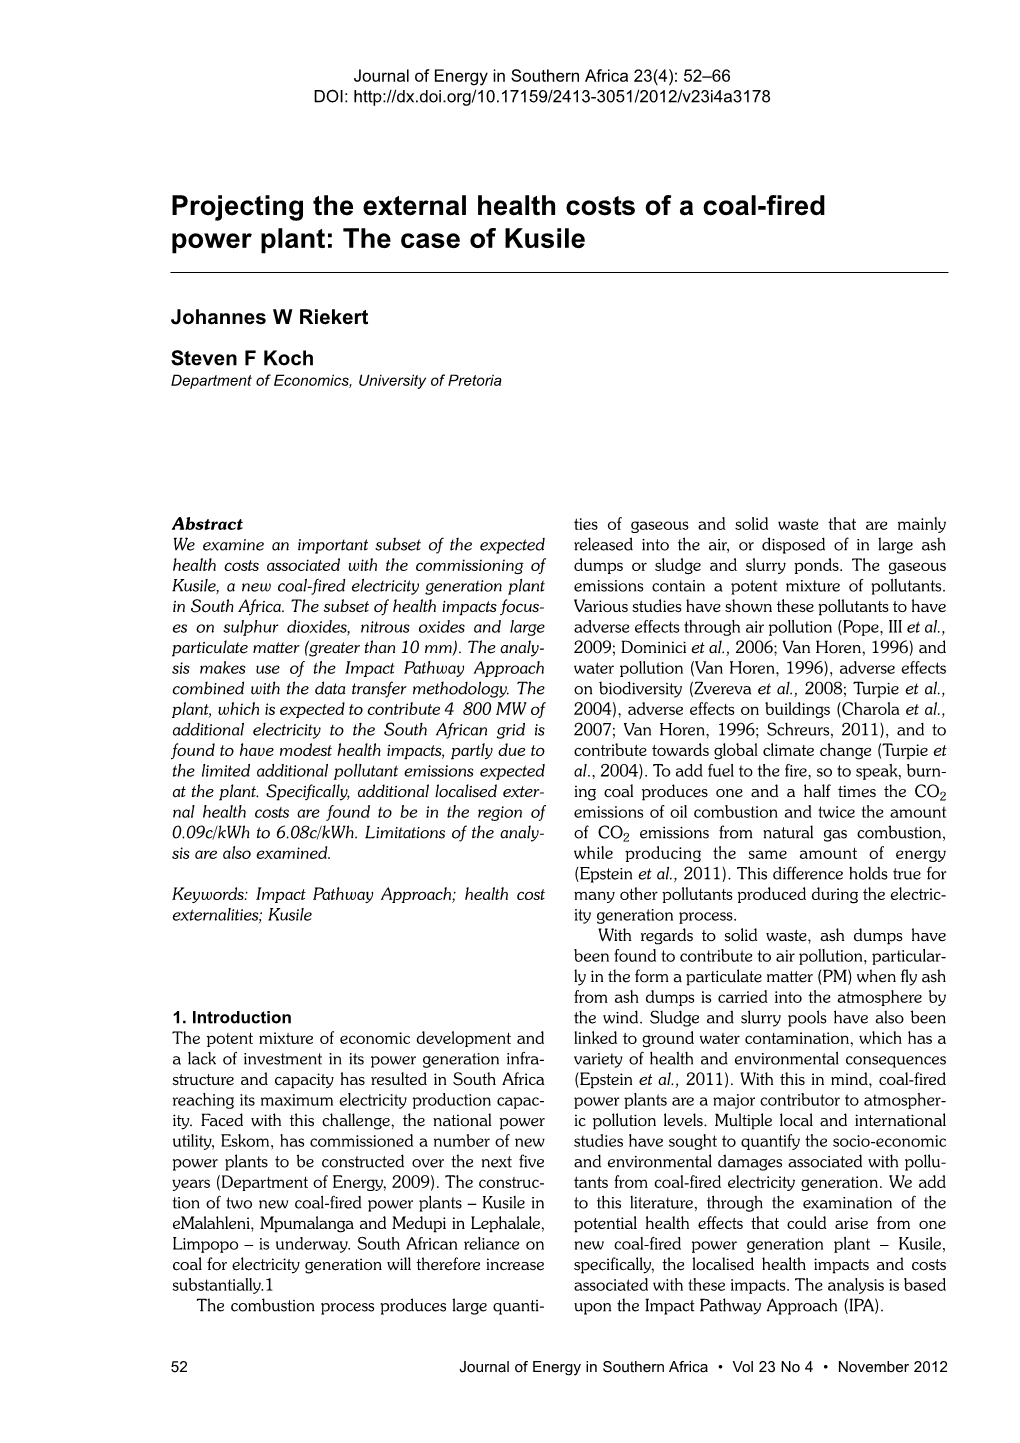 Projecting the External Health Costs of a Coal-Fired Power Plant: the Case of Kusile